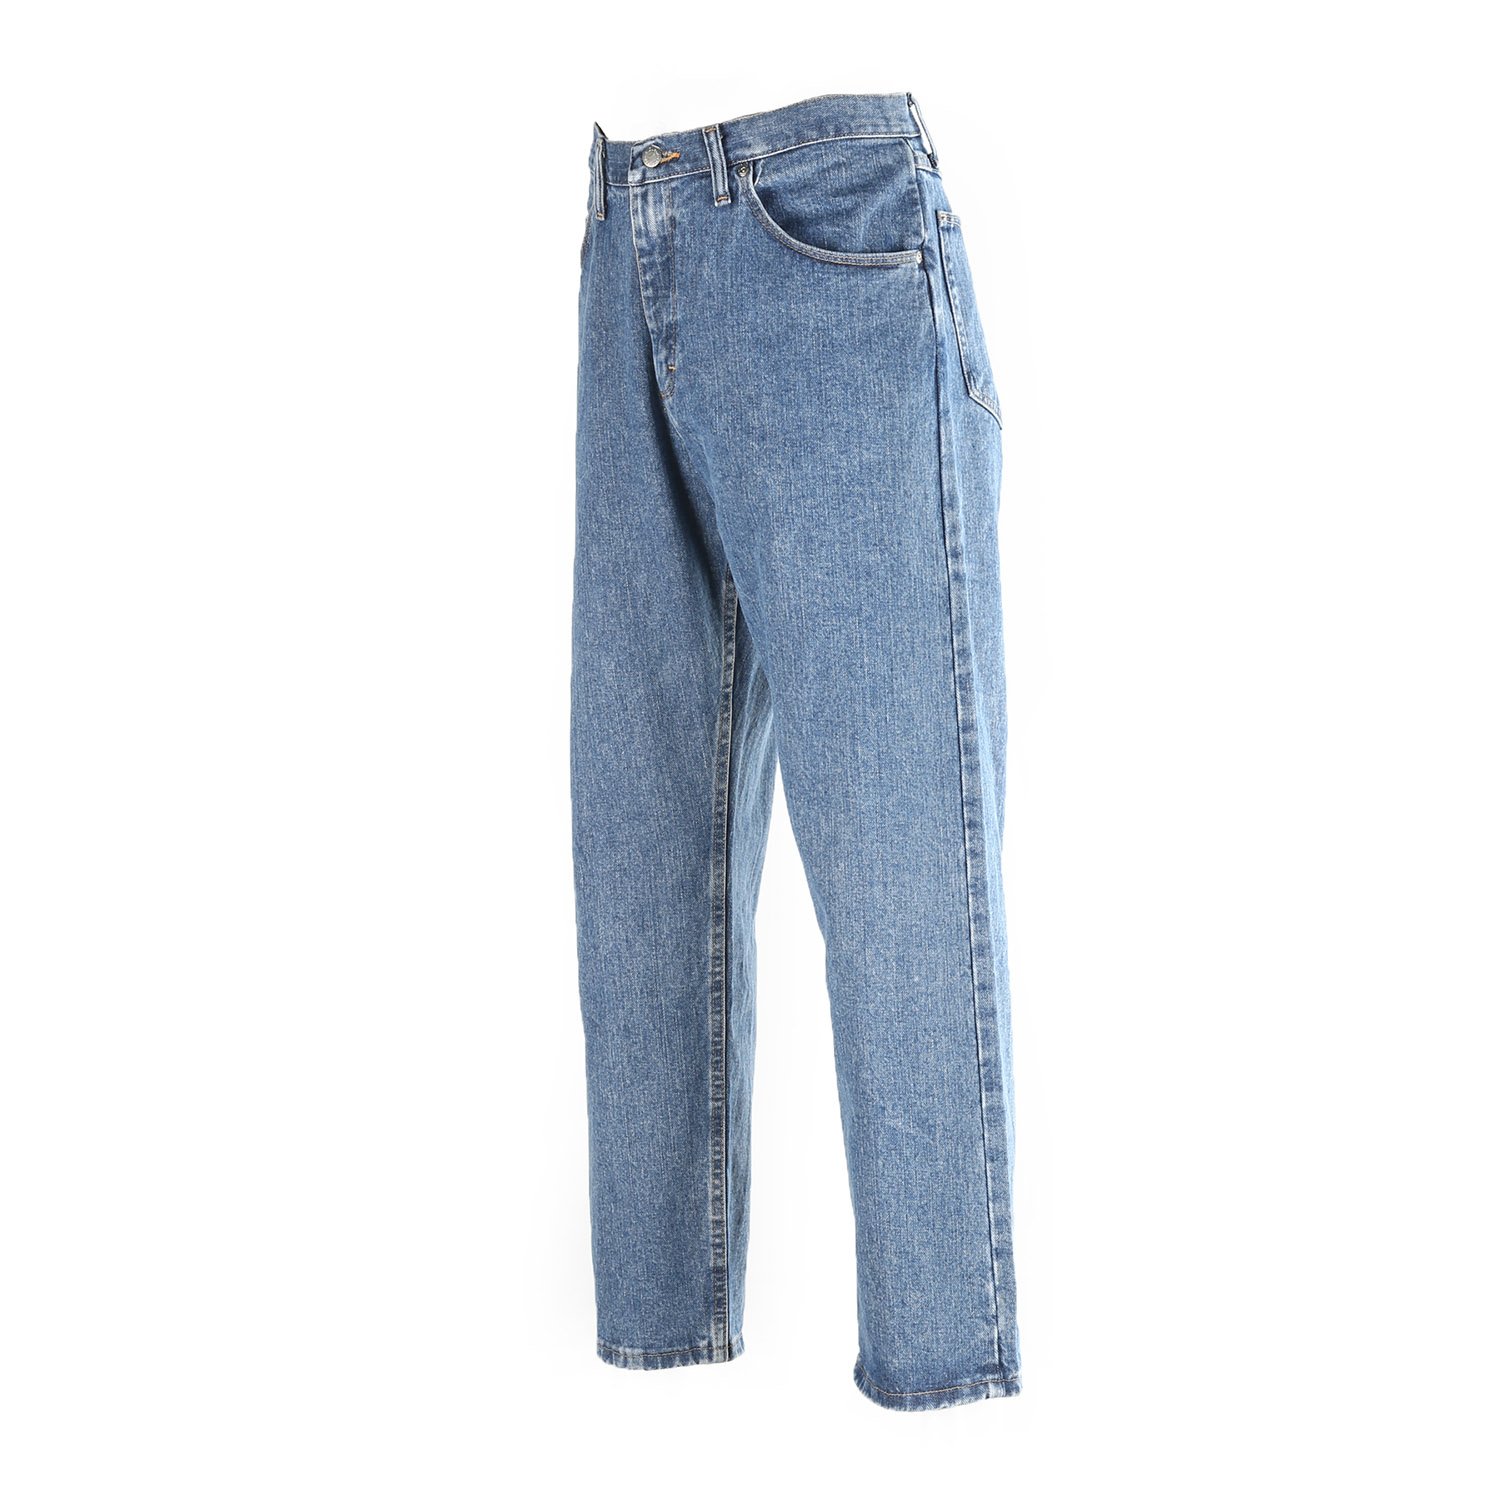 Wrangler Workwear Hero Five Star Relaxed Fit Jeans